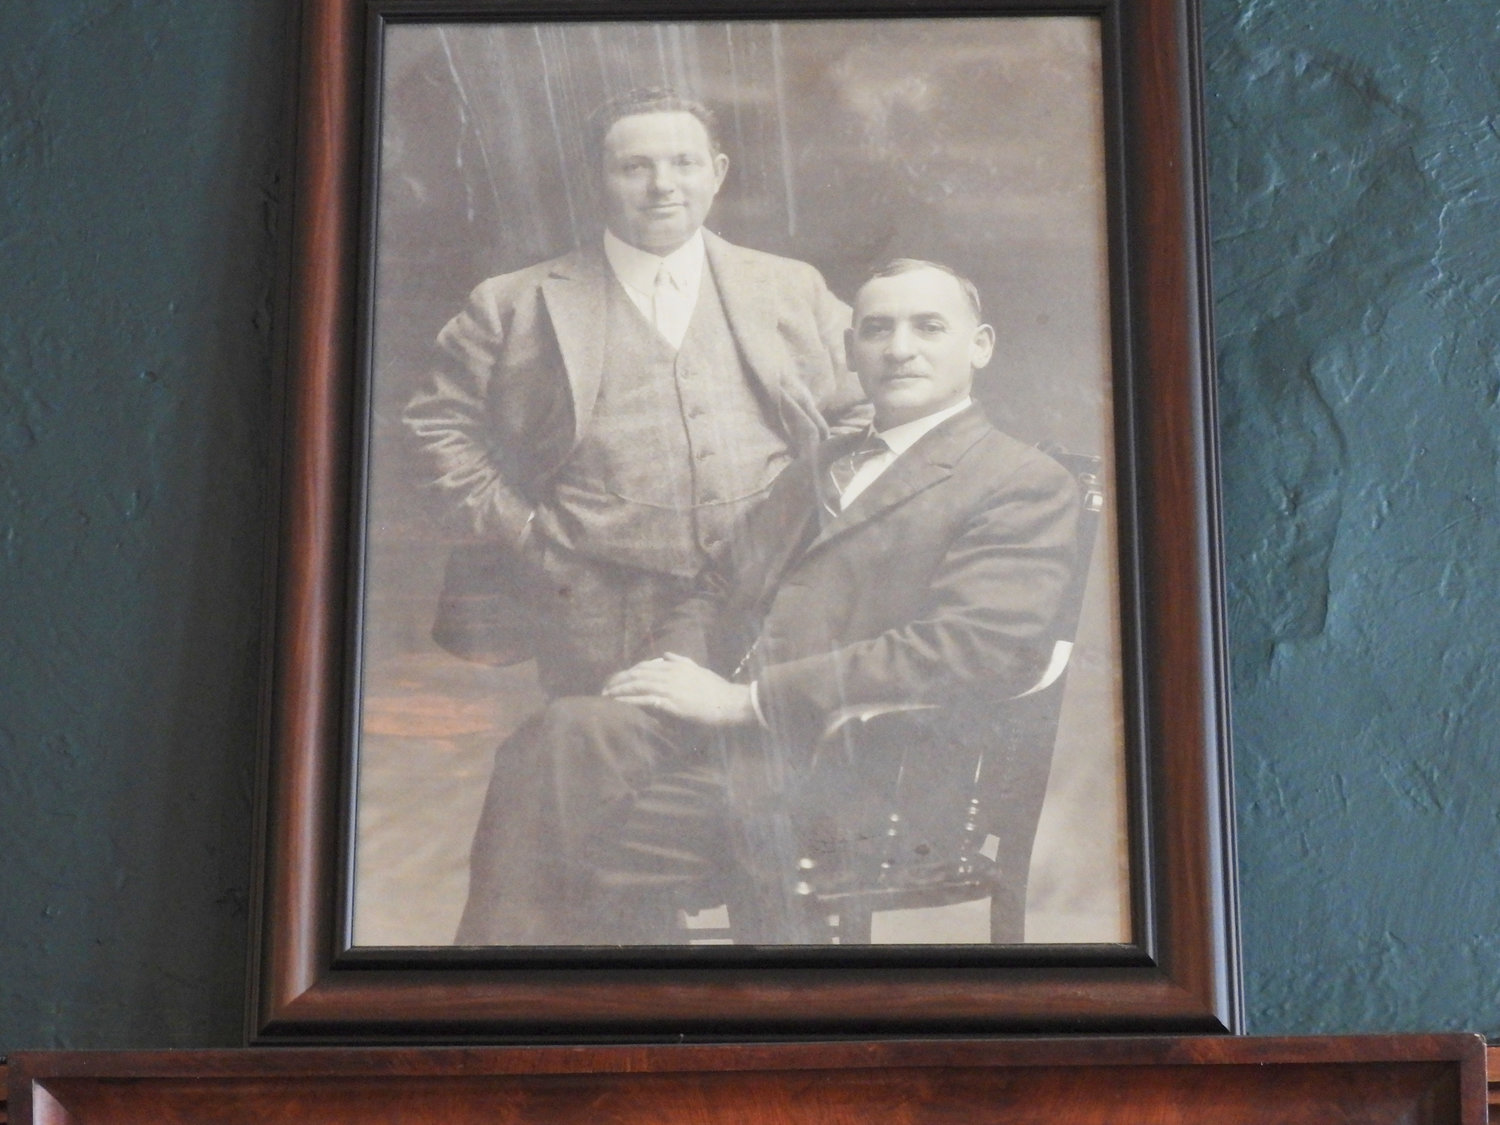 FAMILY BUSINESS — Harry Gerber and his son Leo started their entrepreneurship as a seed shop until prohibition, when alcohol became a very lucrative business and converted the warehouse into a speakeasy.